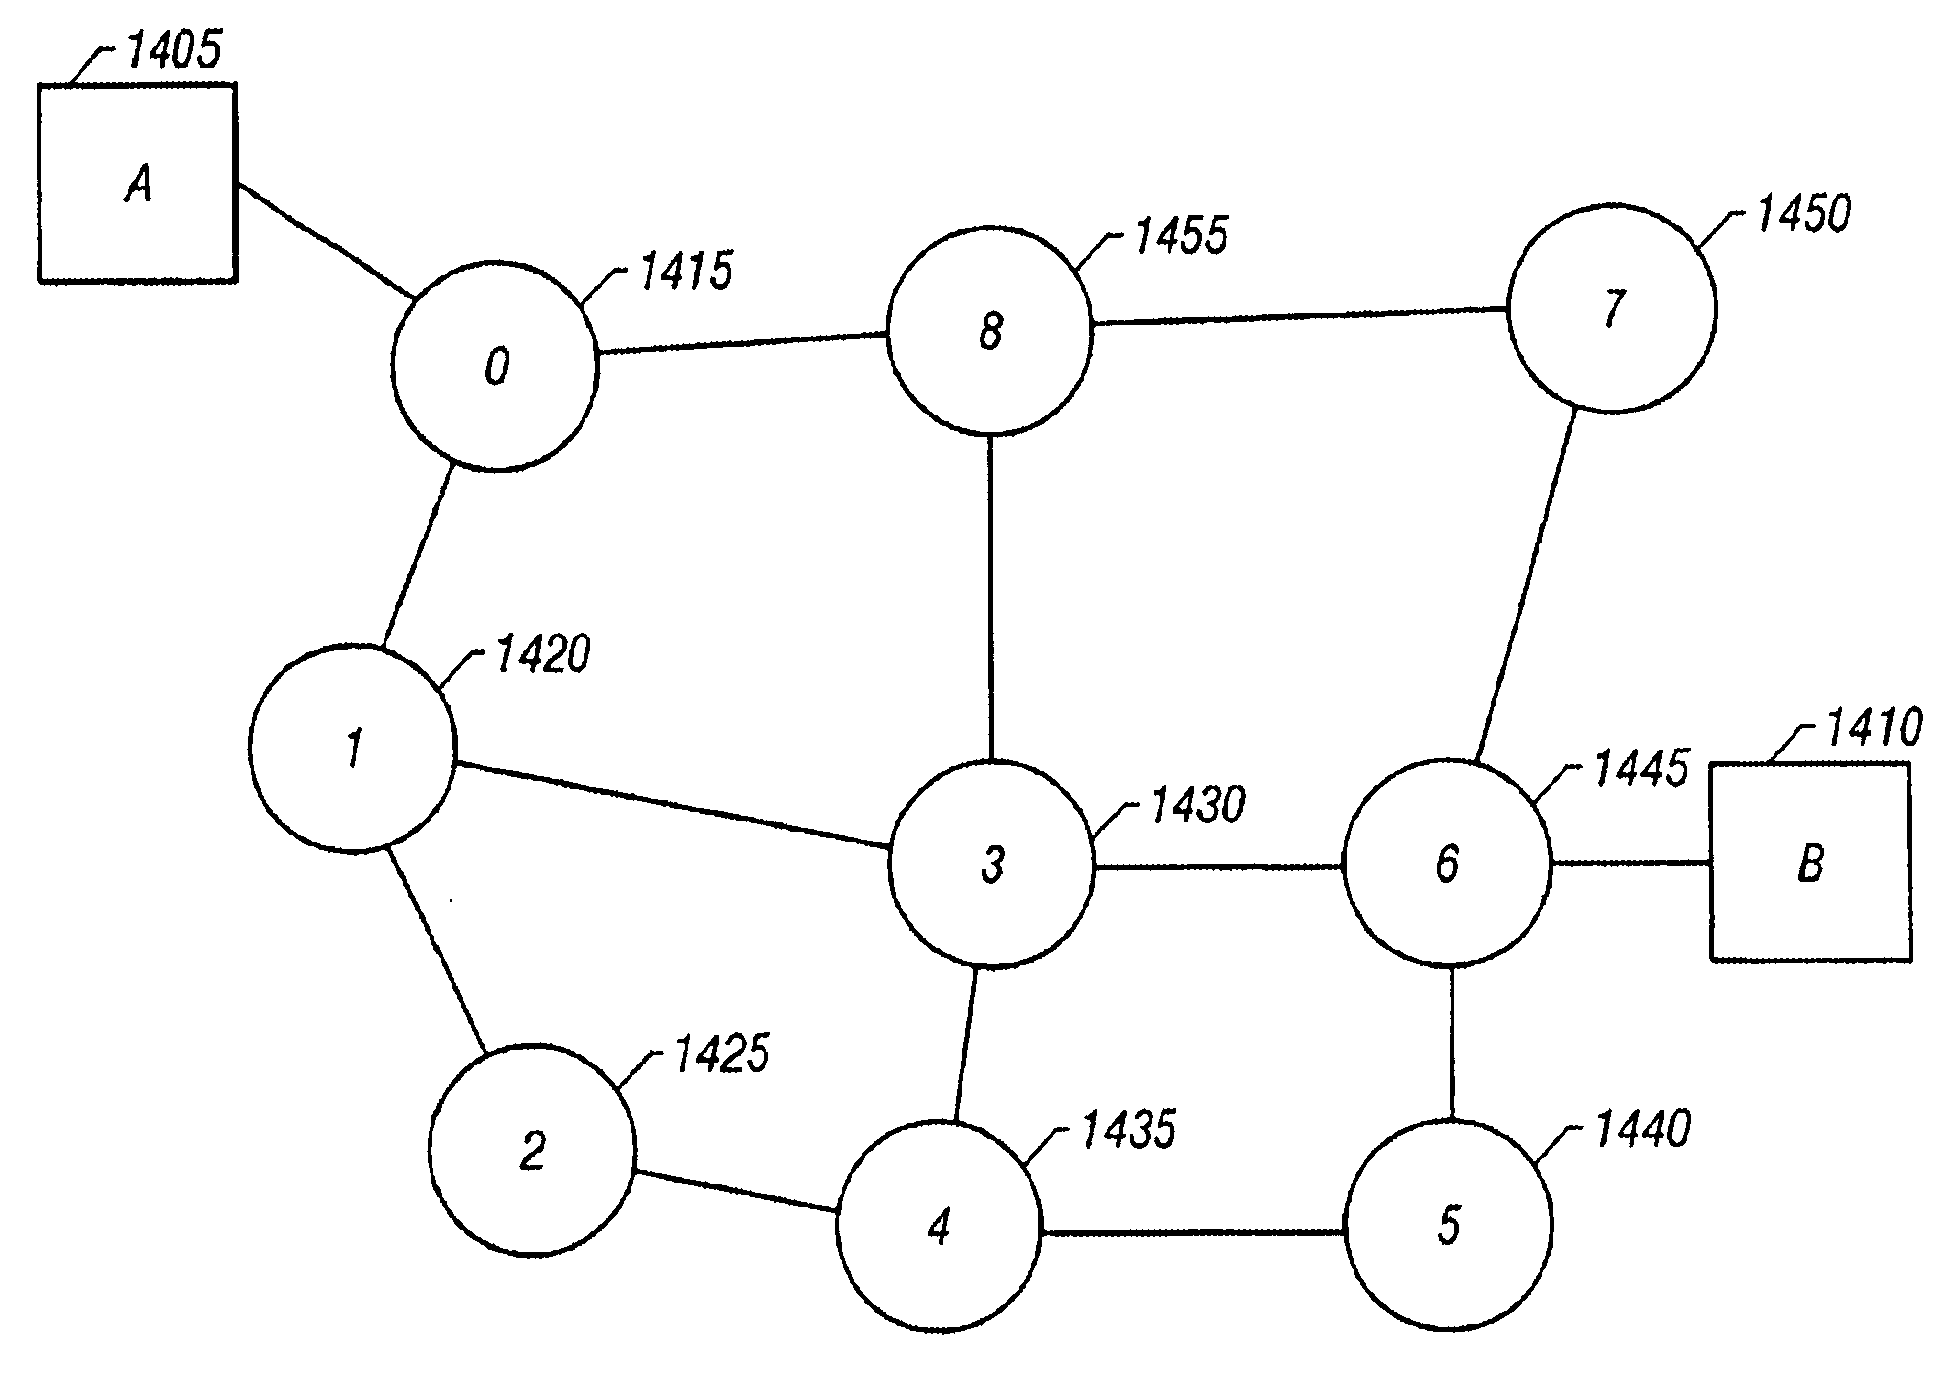 Method for routing information over a network